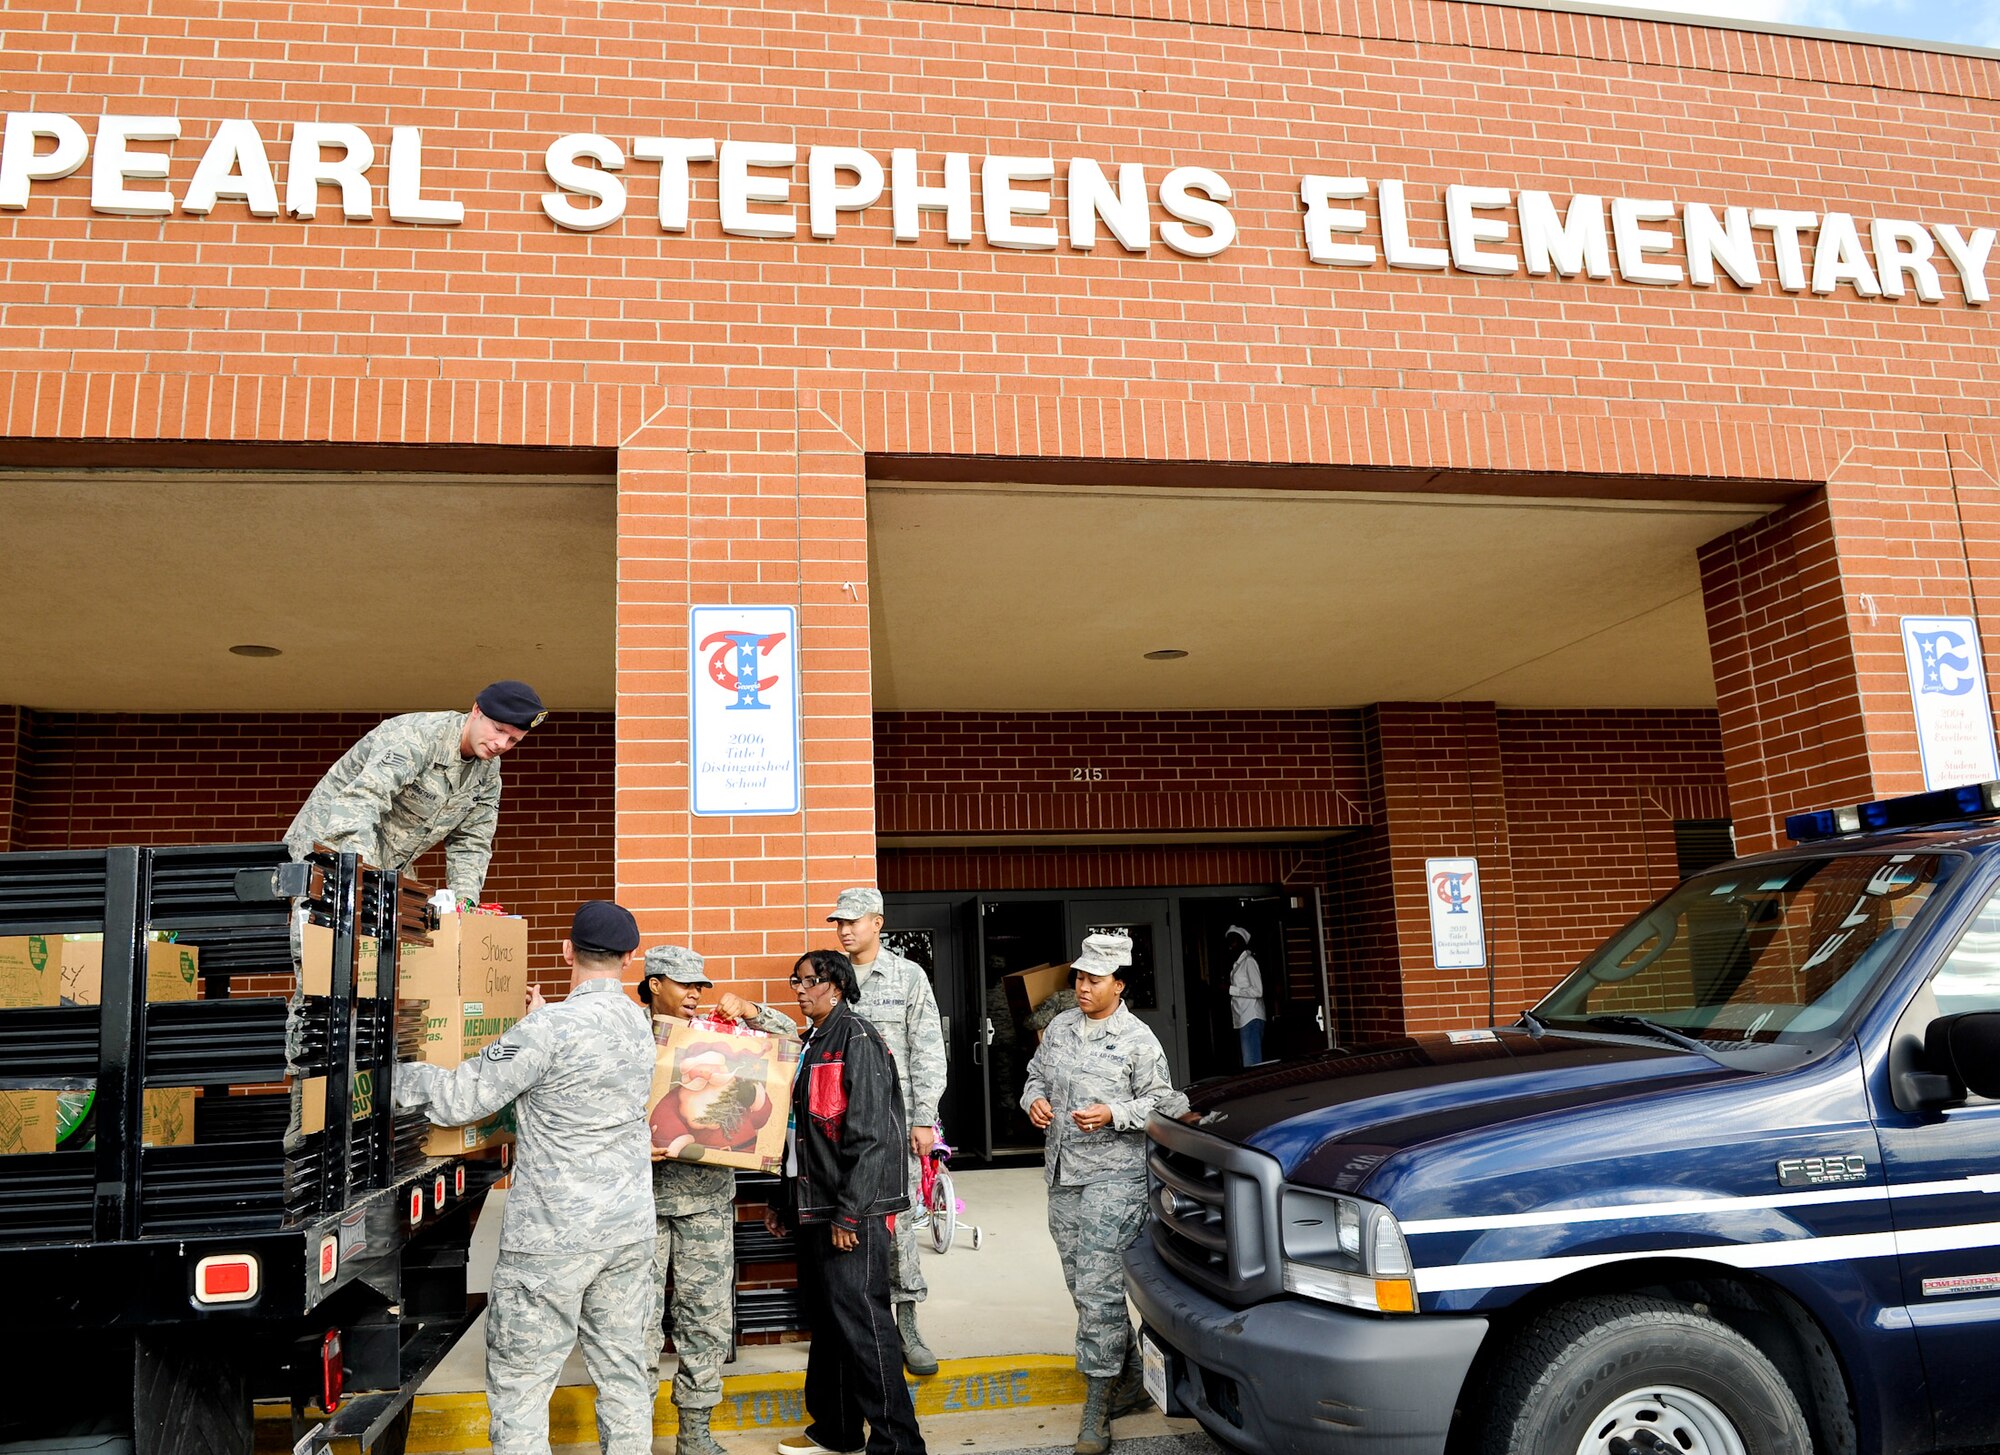 U.S. Air Force Airman from the 116th and 461st Air Control Wings (ACW), Robins Air Force Base, Ga., unload food and toys at Pearl Stephens Elementary school, Warner Robins, Ga., Dec. 9, 2011.  The items were donated through the annual Family-2-Family project coordinated by the 116th and 461st ACW.  The project provides food and toys to community and military families for the holidays.  
(National Guard photo by Master Sgt. Roger Parsons/Released)
